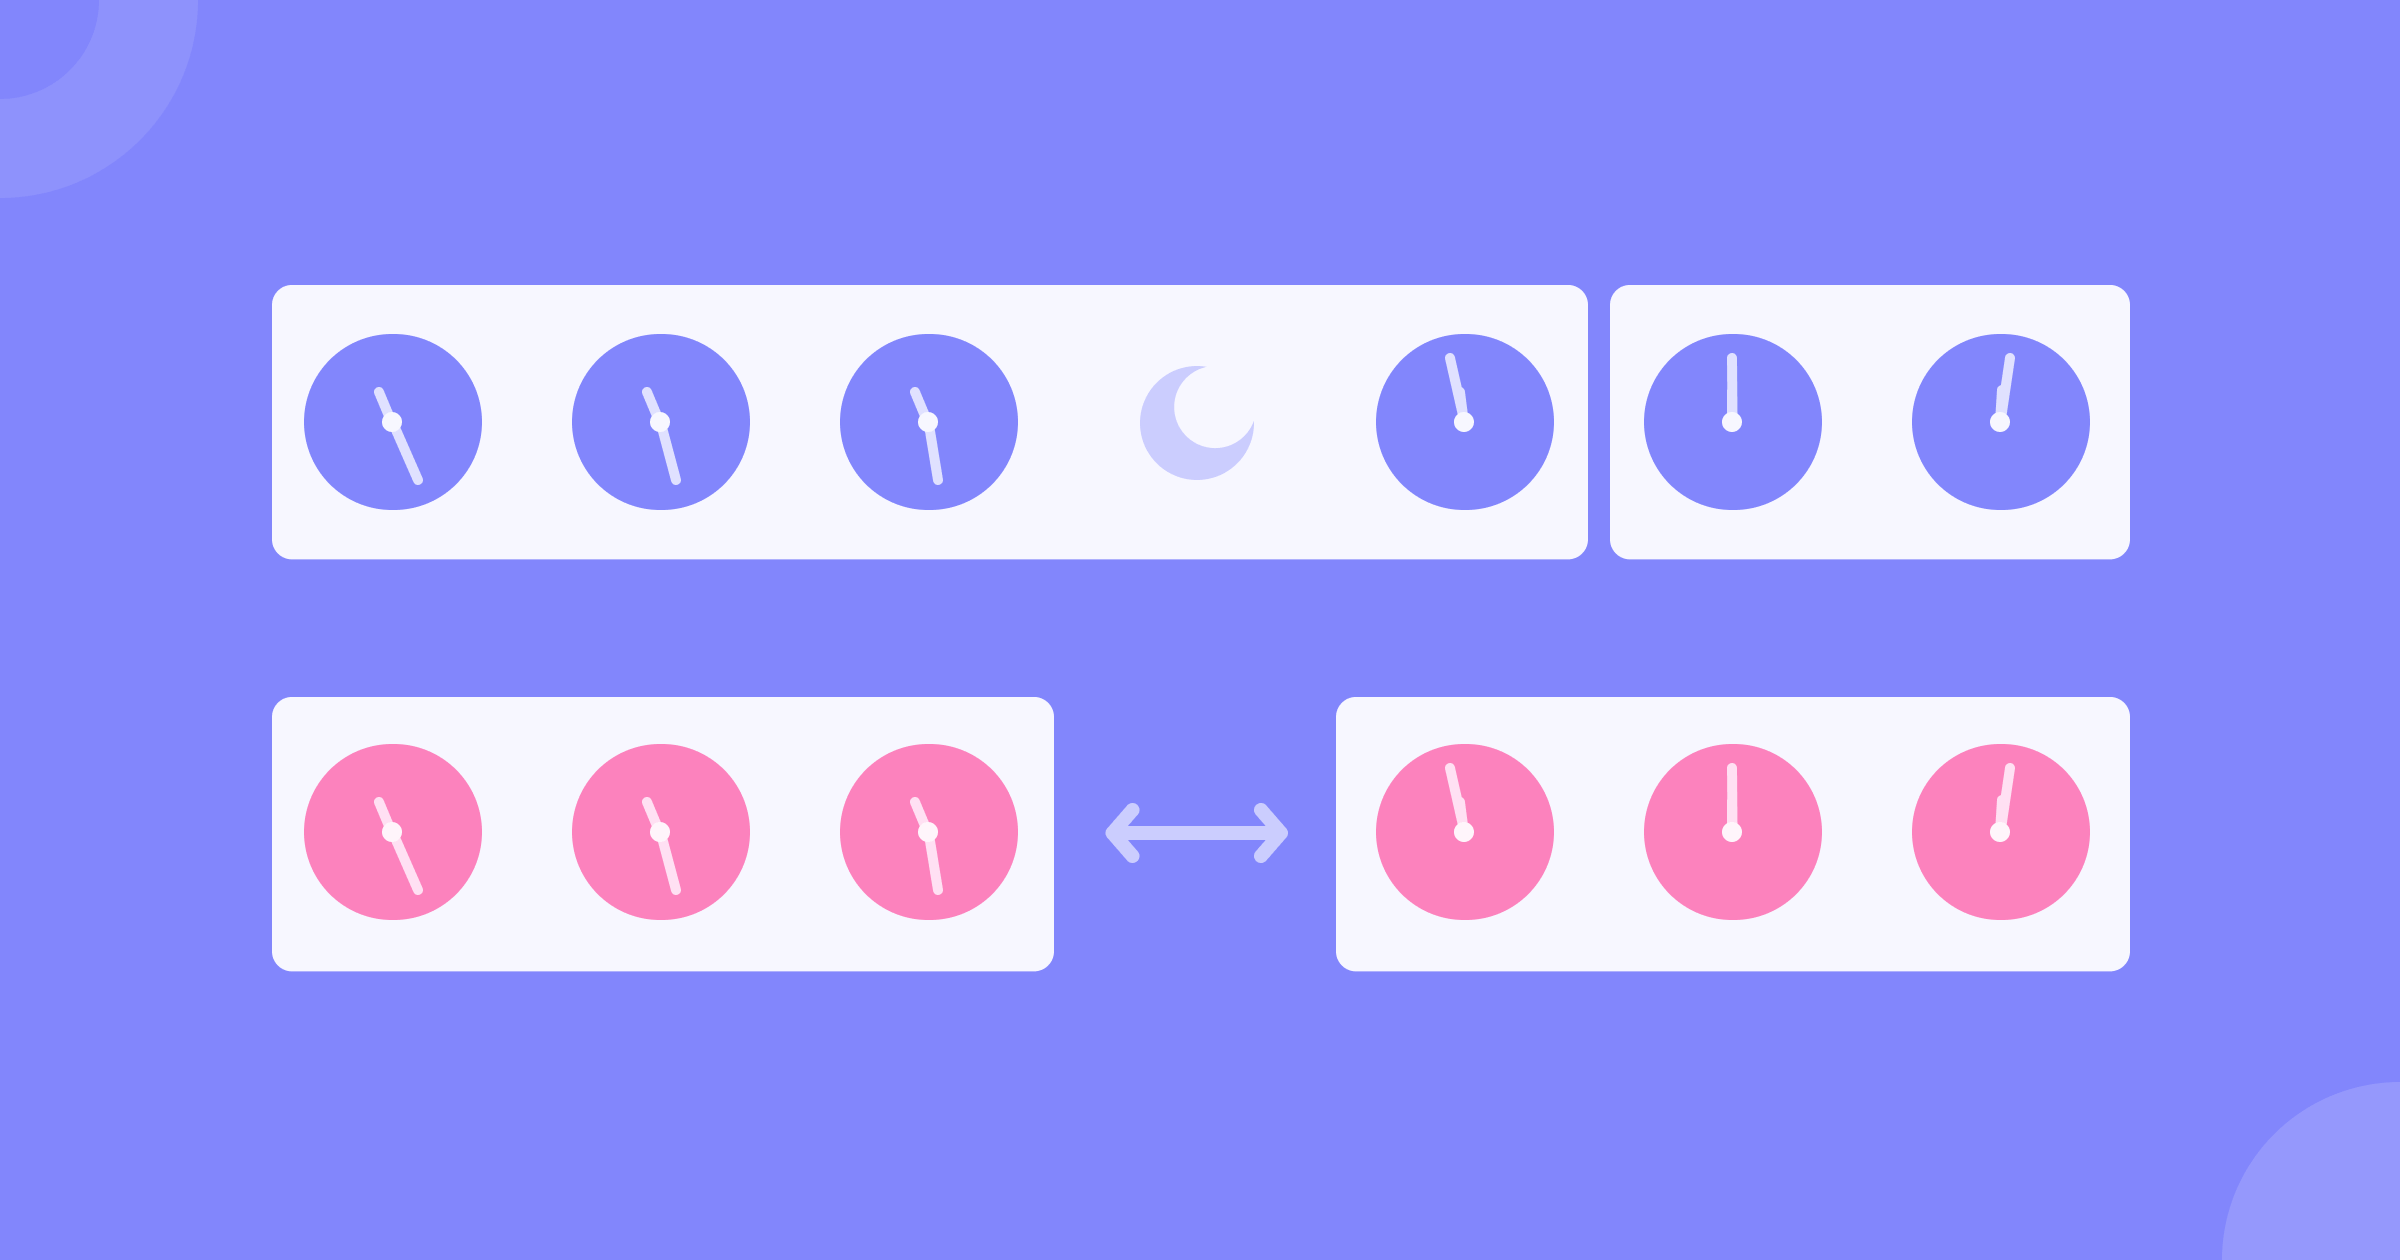 First a graph representing the midnight policy with a moon representing the end of the cycle and, below, a graph representing the timeout policy with an arrow connecting the session interval representing the grace time.